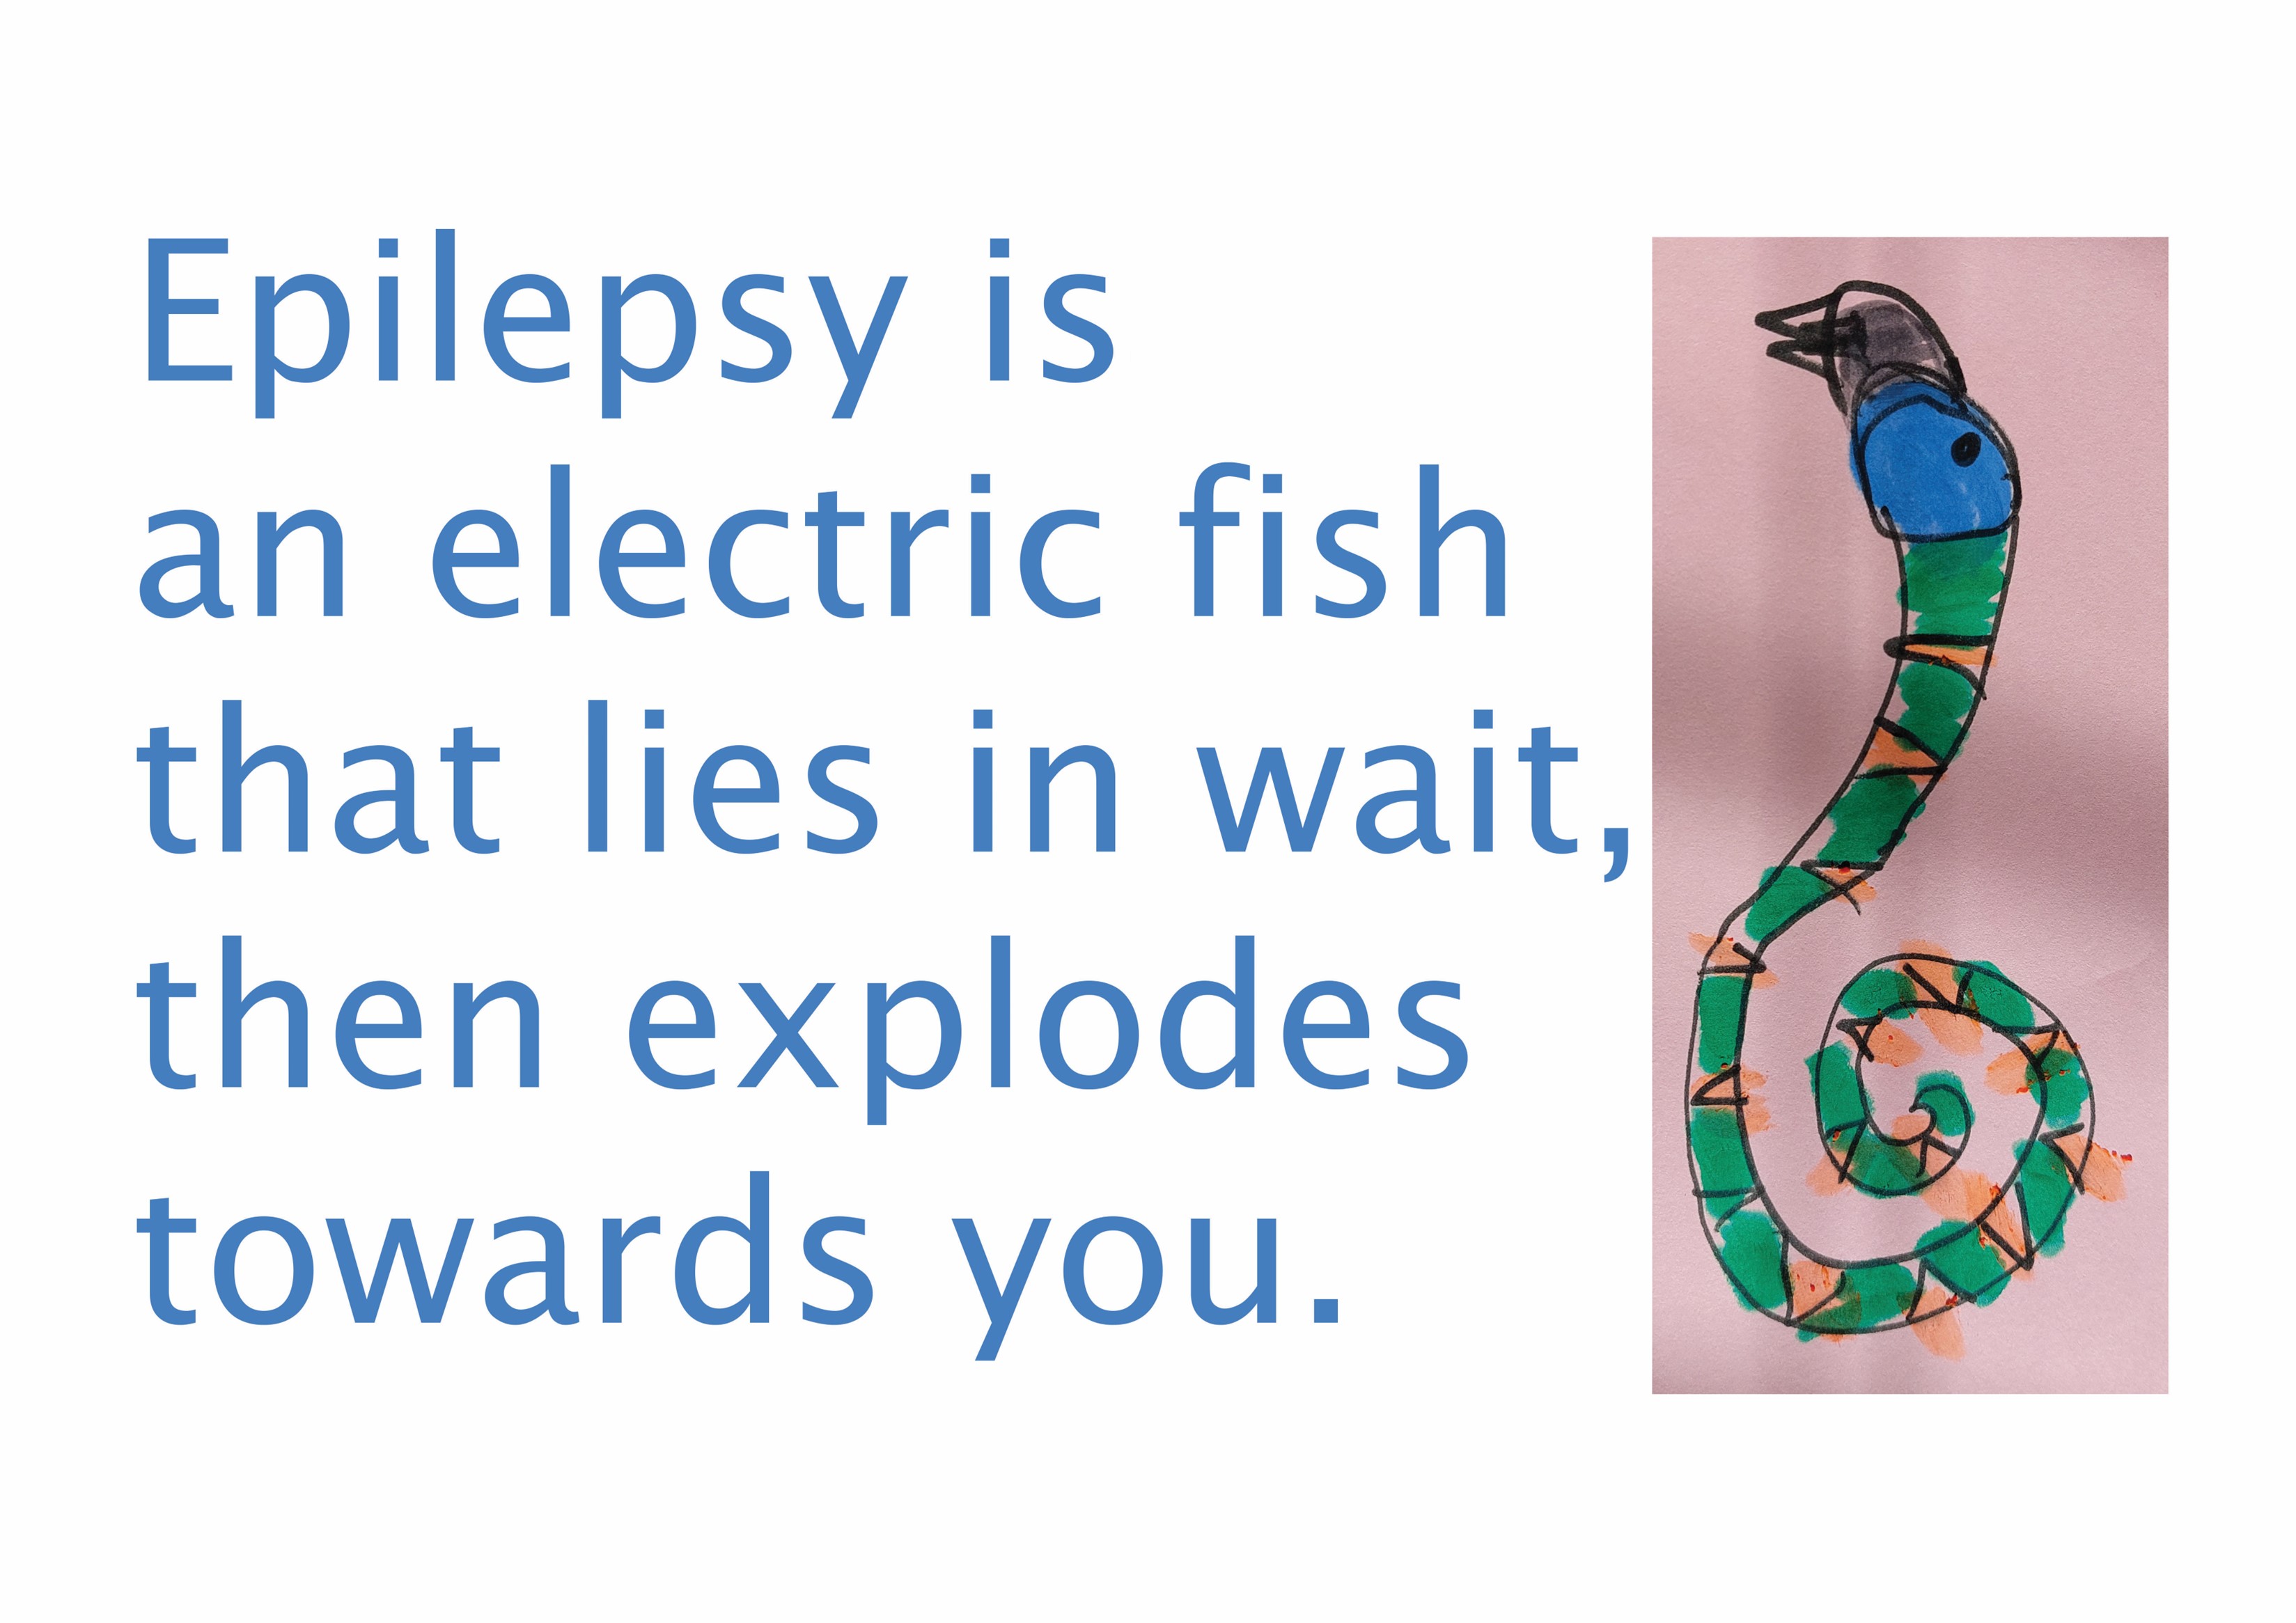 Epilepsy is an electric fish that lies in wait, then explodes towards you quote with a drawing of an electric fish next to the quote